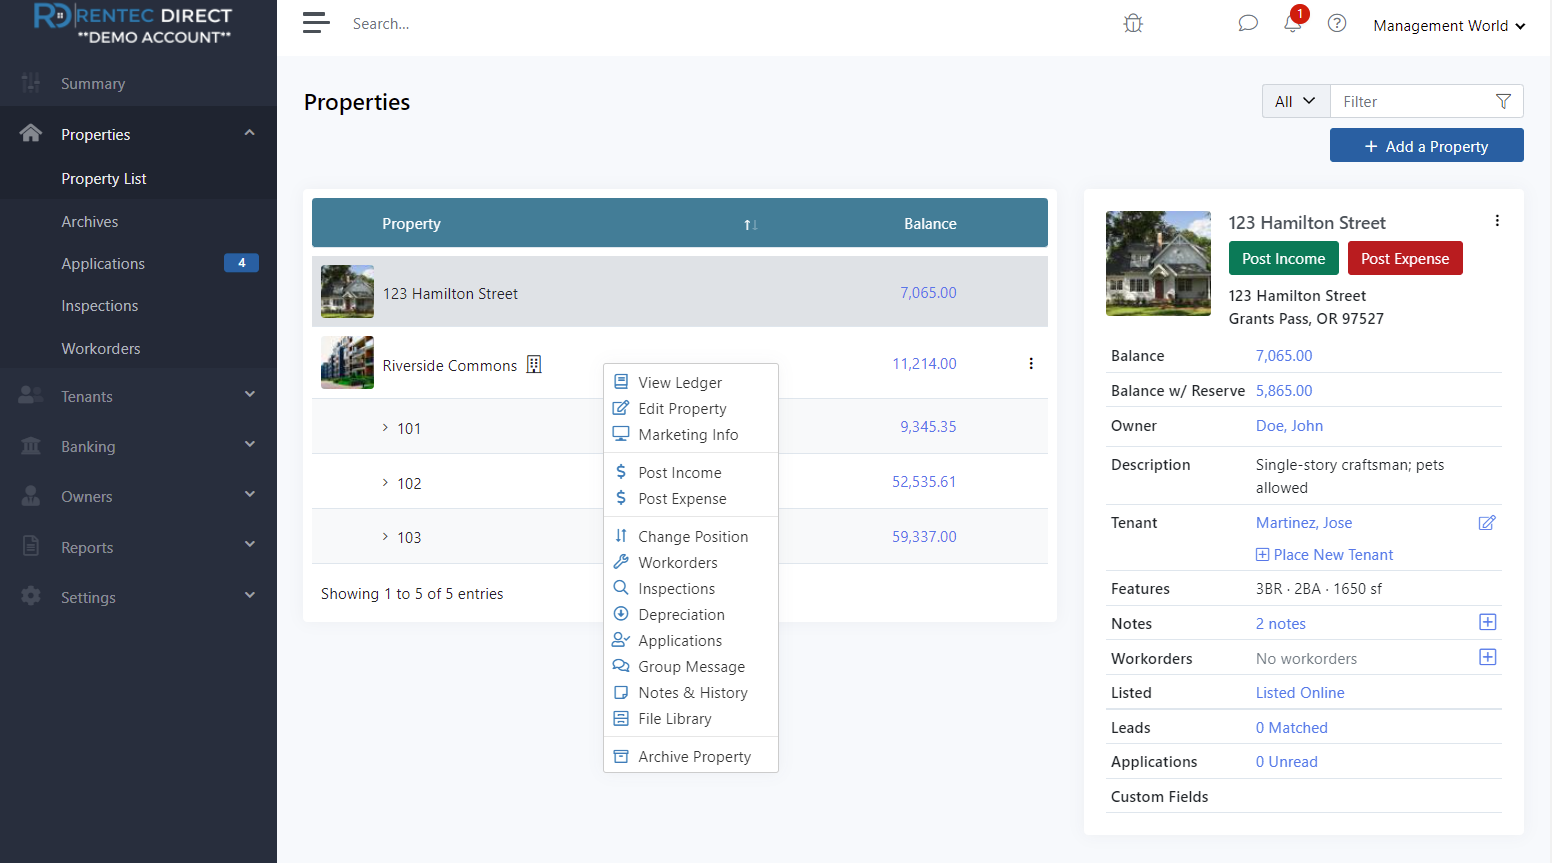 Rentec Direct Software - The Properties Page gives you detailed information for each property and unit. You can manage property profiles that will be used for the rental listing if the property ever becomes vacant. You will also see the current rent payment status.